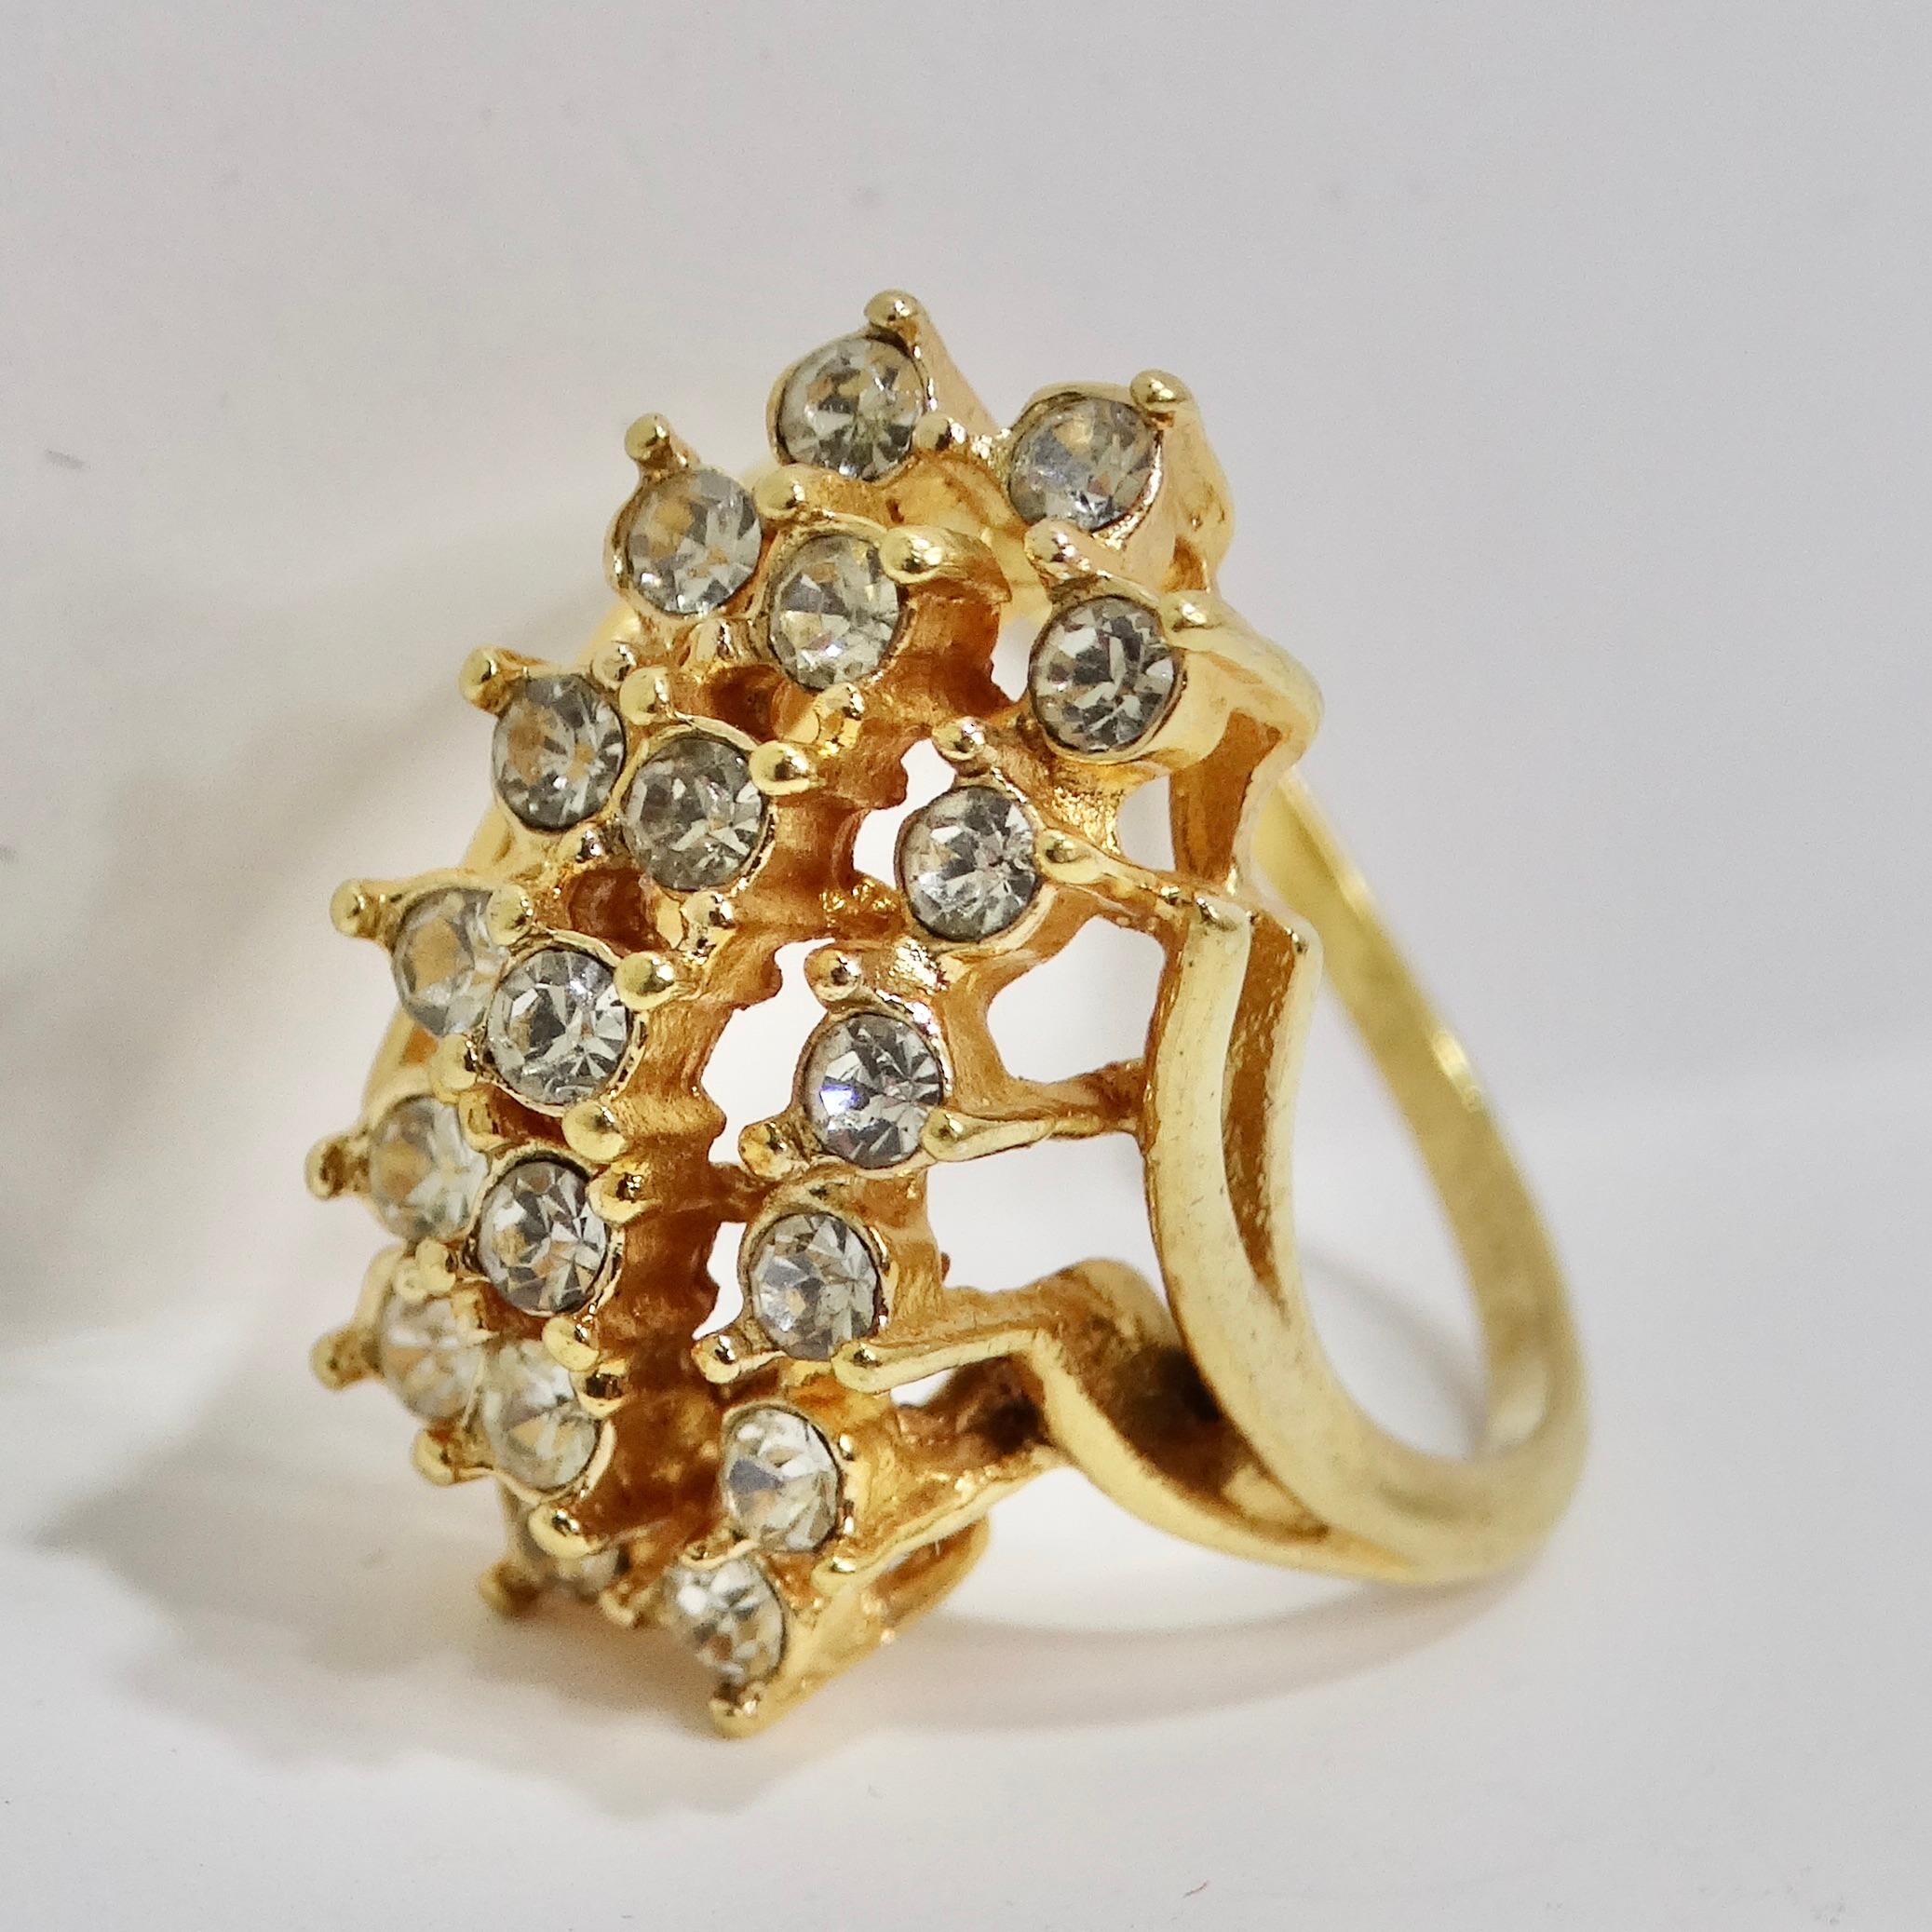 1960s Gold Plated Rhinestone Ring In Good Condition For Sale In Scottsdale, AZ